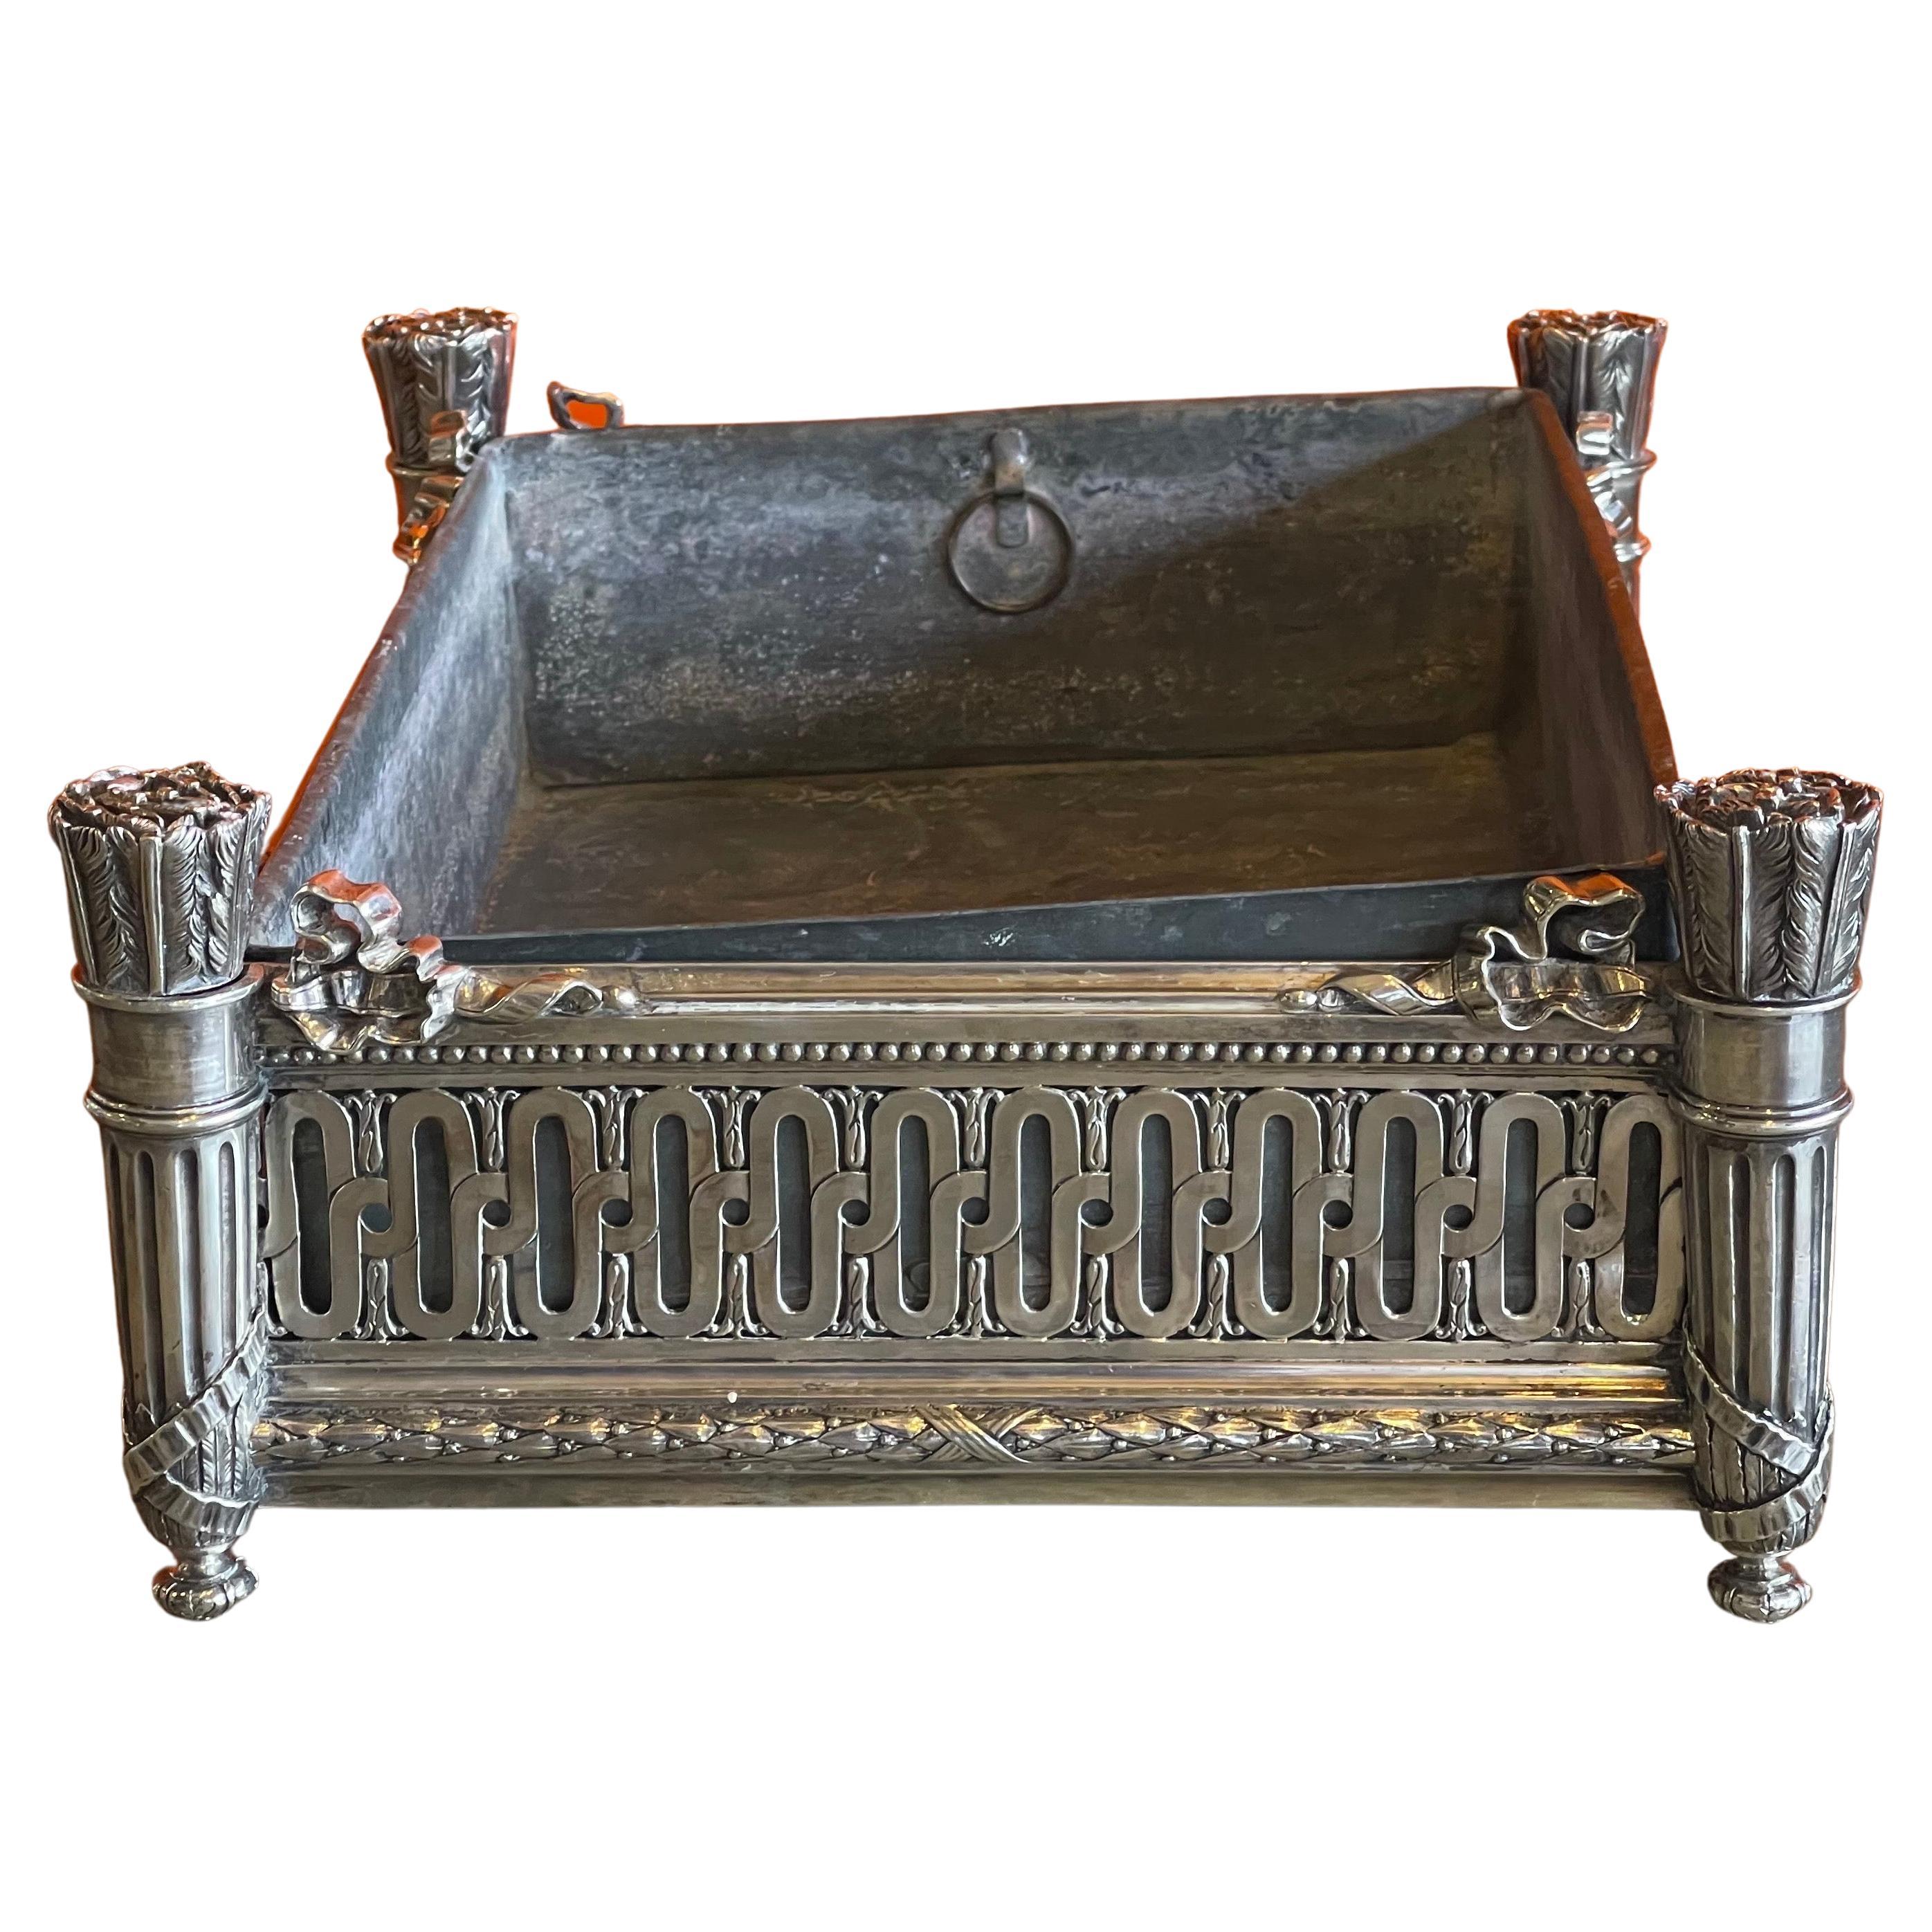 Large antique solid silver Napoleon III era jardinere / table top planter by Andre Aucoc, circa late 1800s. This gorgeous piece with a pierced gallery and four quiver legs includes the original lead insert pan. The piece measures 14.5